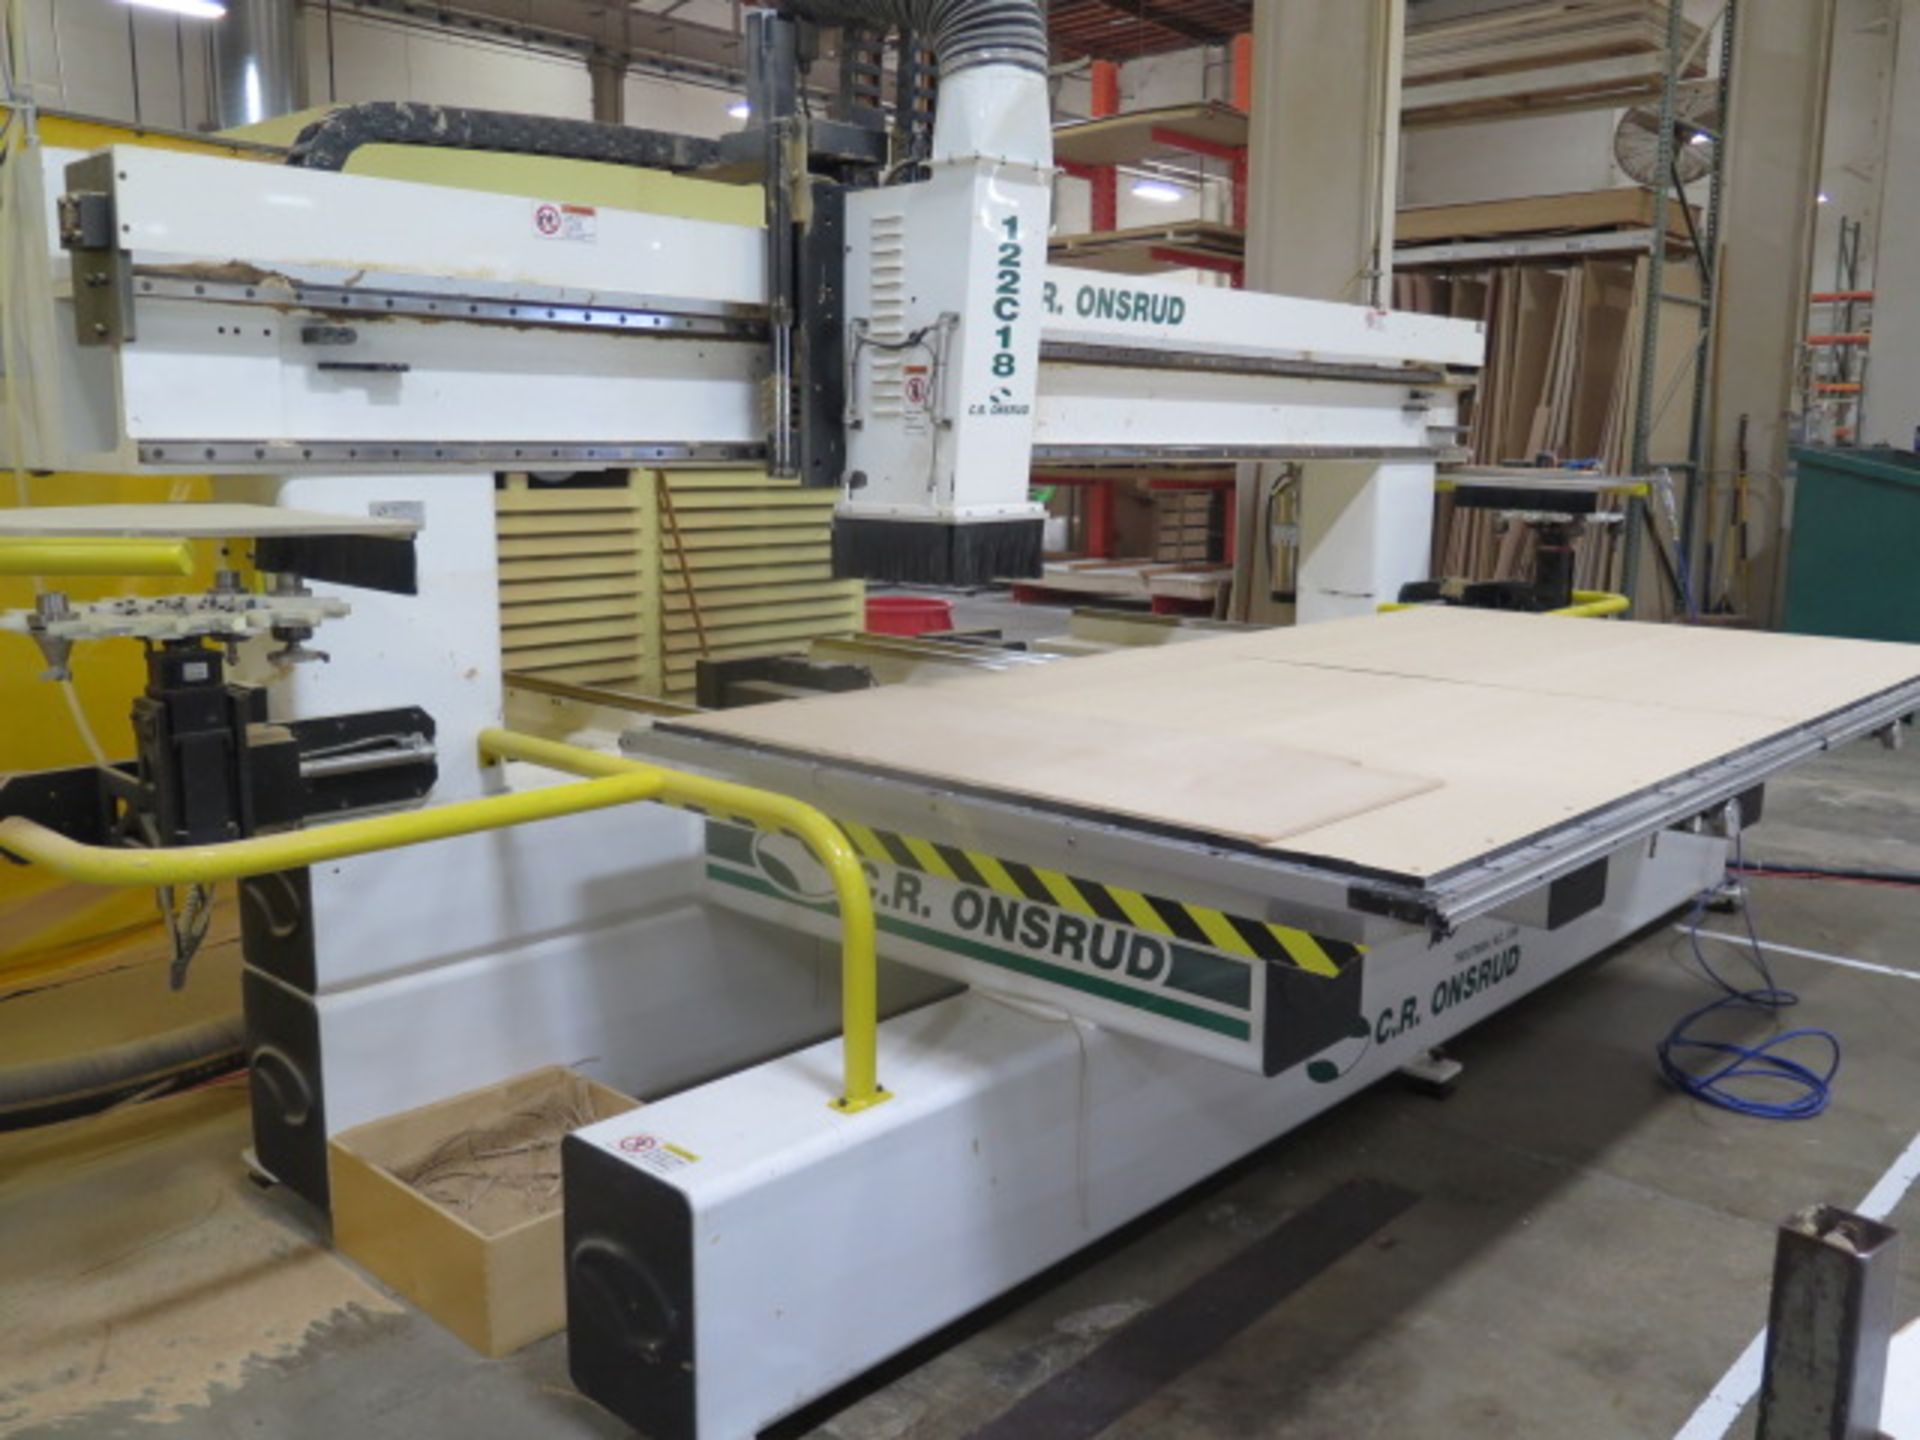 2008 C.R. Onsrud 122C18 CNC Router s/n 12280701 w/ WinMedia CNC Controls, SOLD AS IS - Image 4 of 18